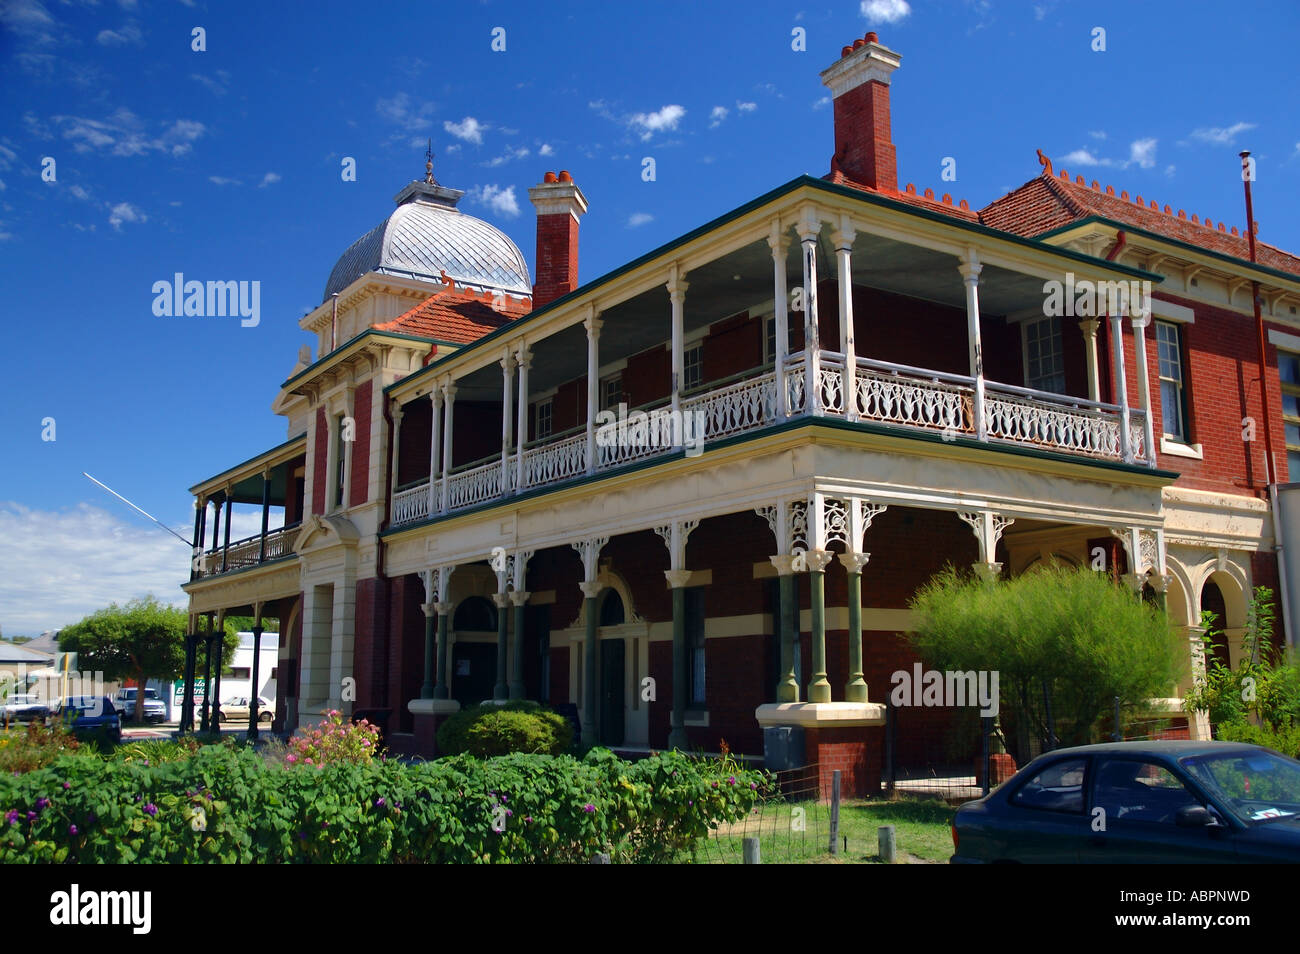 Traditional colonial style architecture of the old Peninsula Tavern Maylands Perth Western Australia No PR Stock Photo